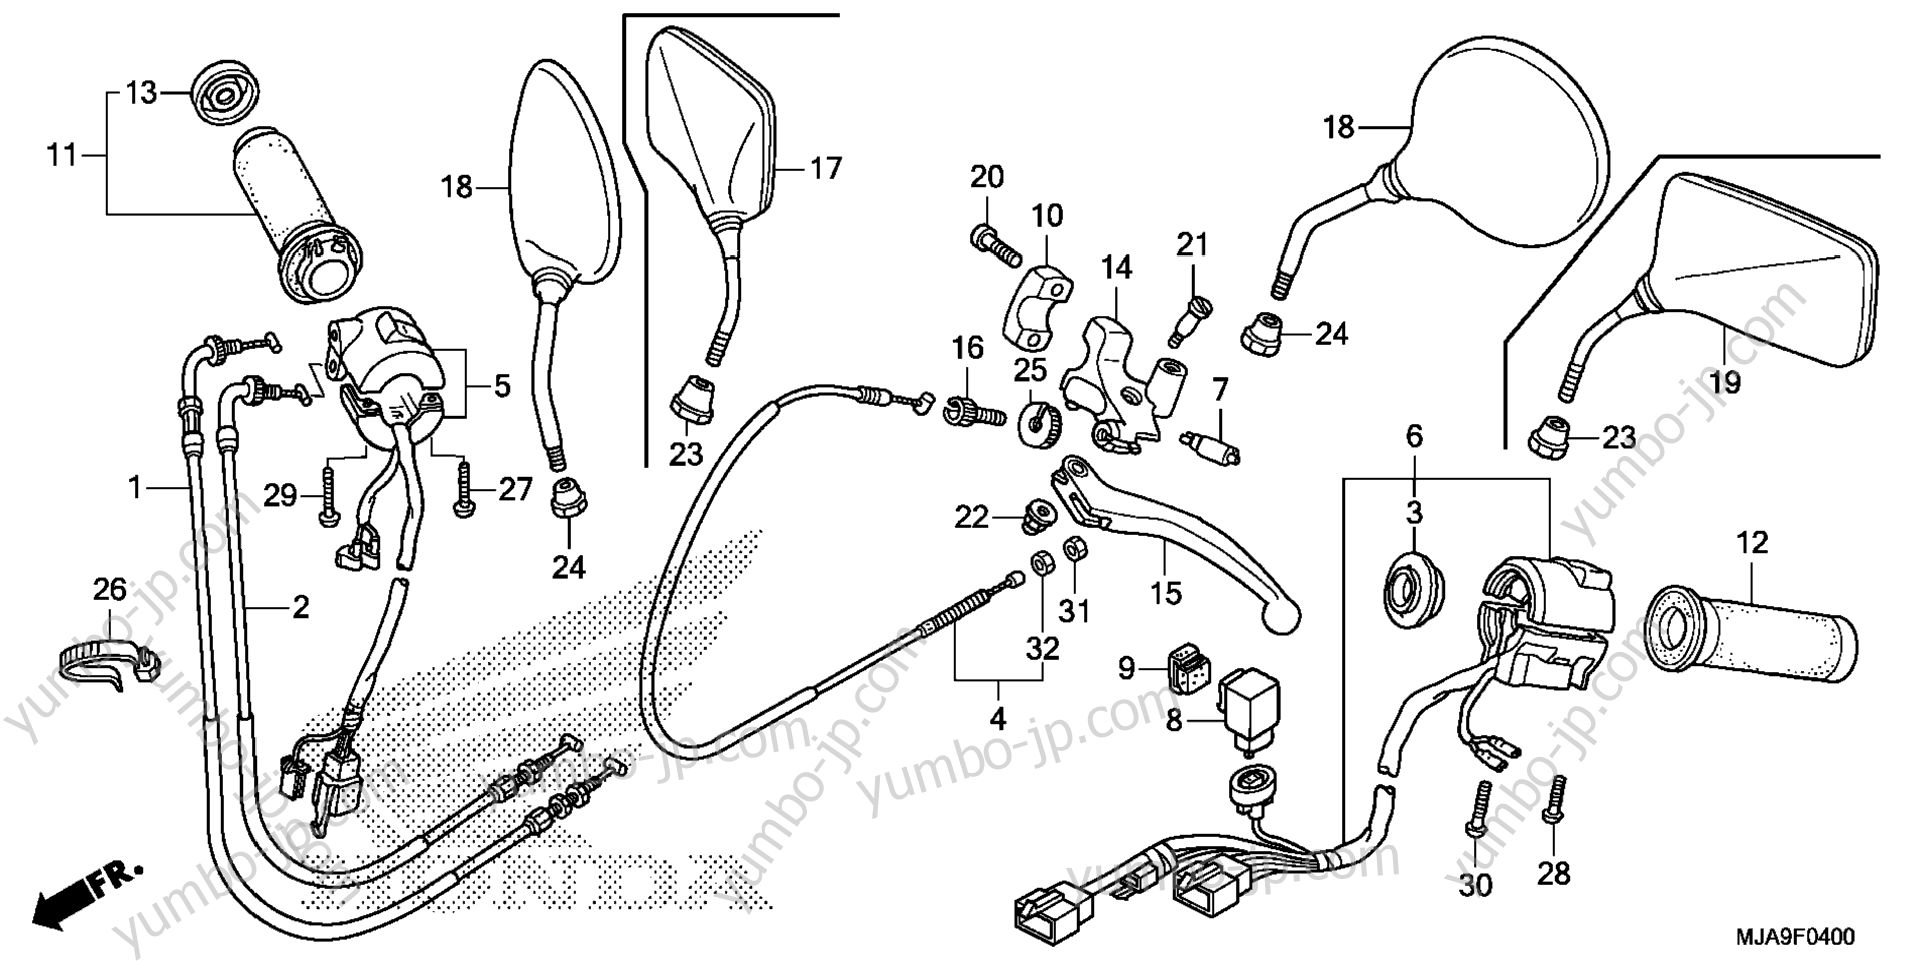 HANDLE LEVER / SWITCH / CABLE for motorcycles HONDA VT750C AC 2015 year